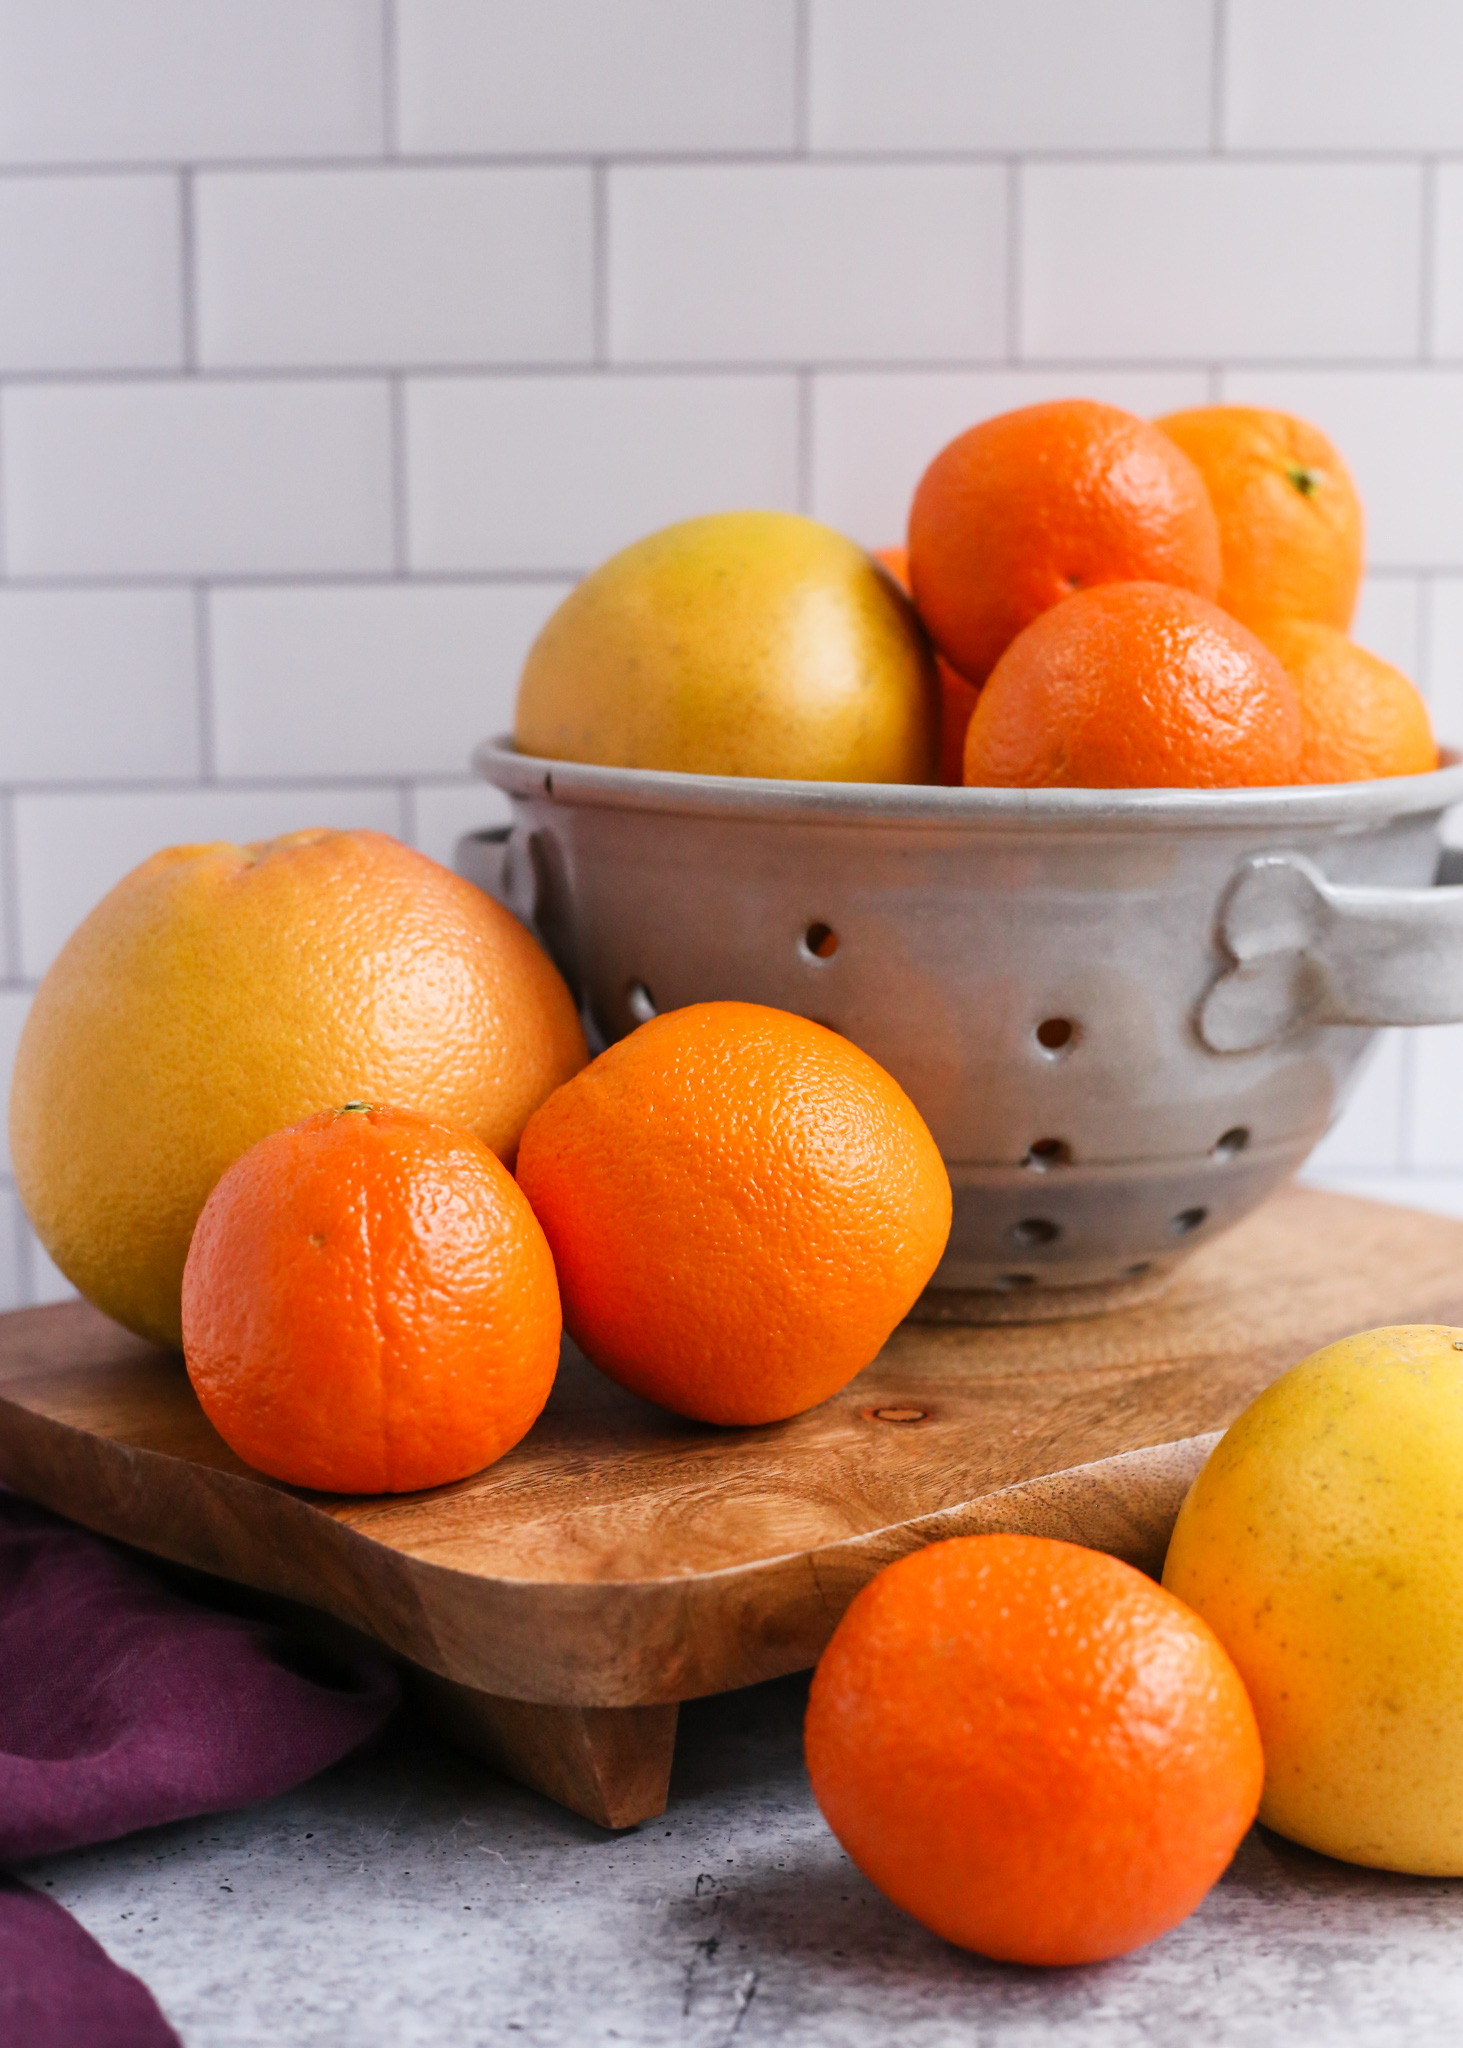 An assortment of Florida Citrus in a colander on a kitchen counter, including Florida Oranges, Florida Grapefruit, and Florida Tangerines